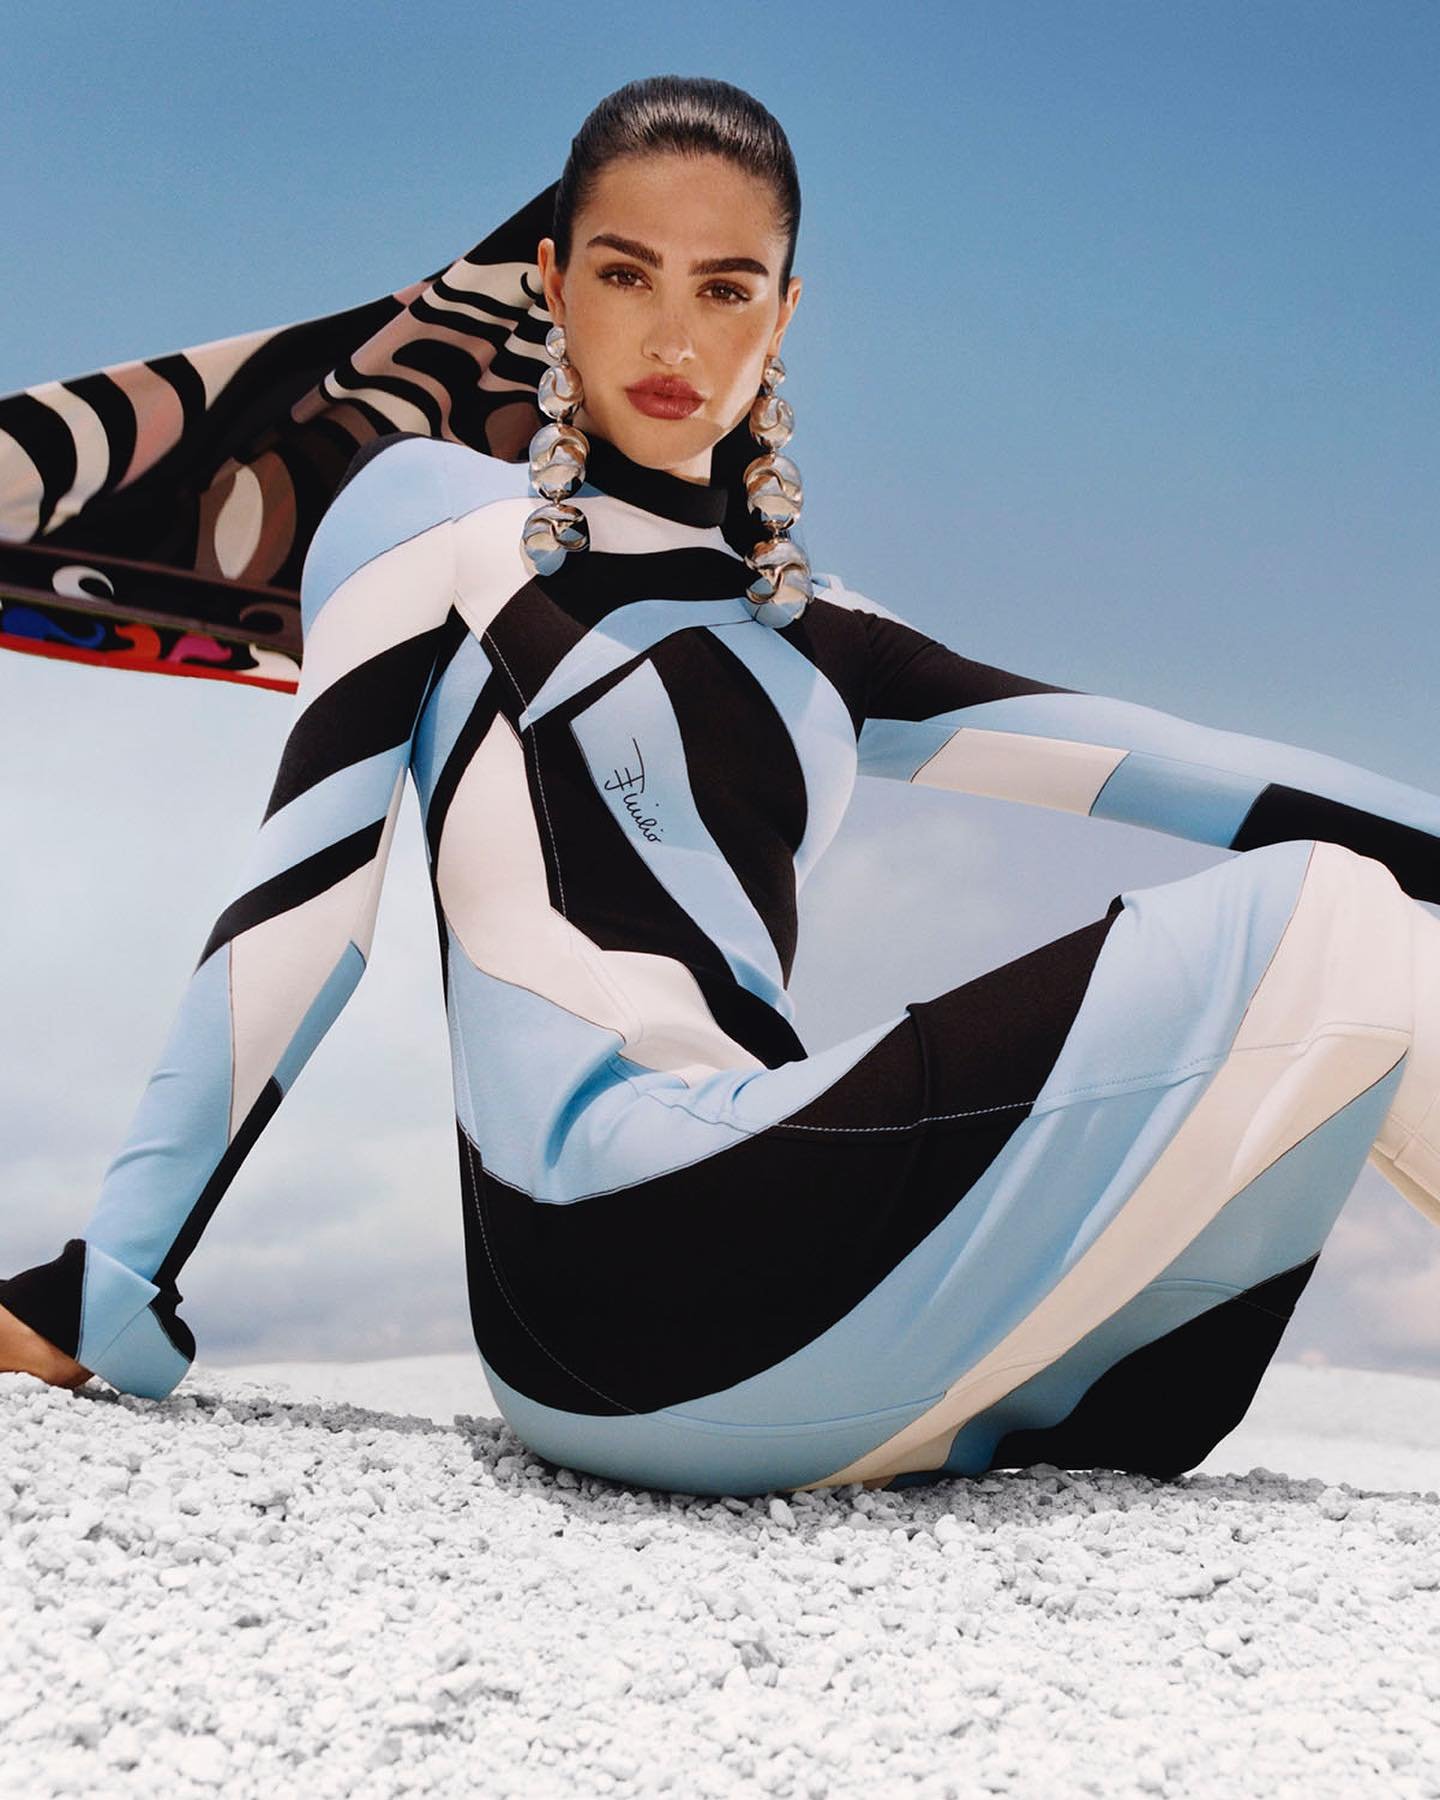 Emilio Pucci Supernova FW 2023 Campaign with Amelia Gray Lensed by